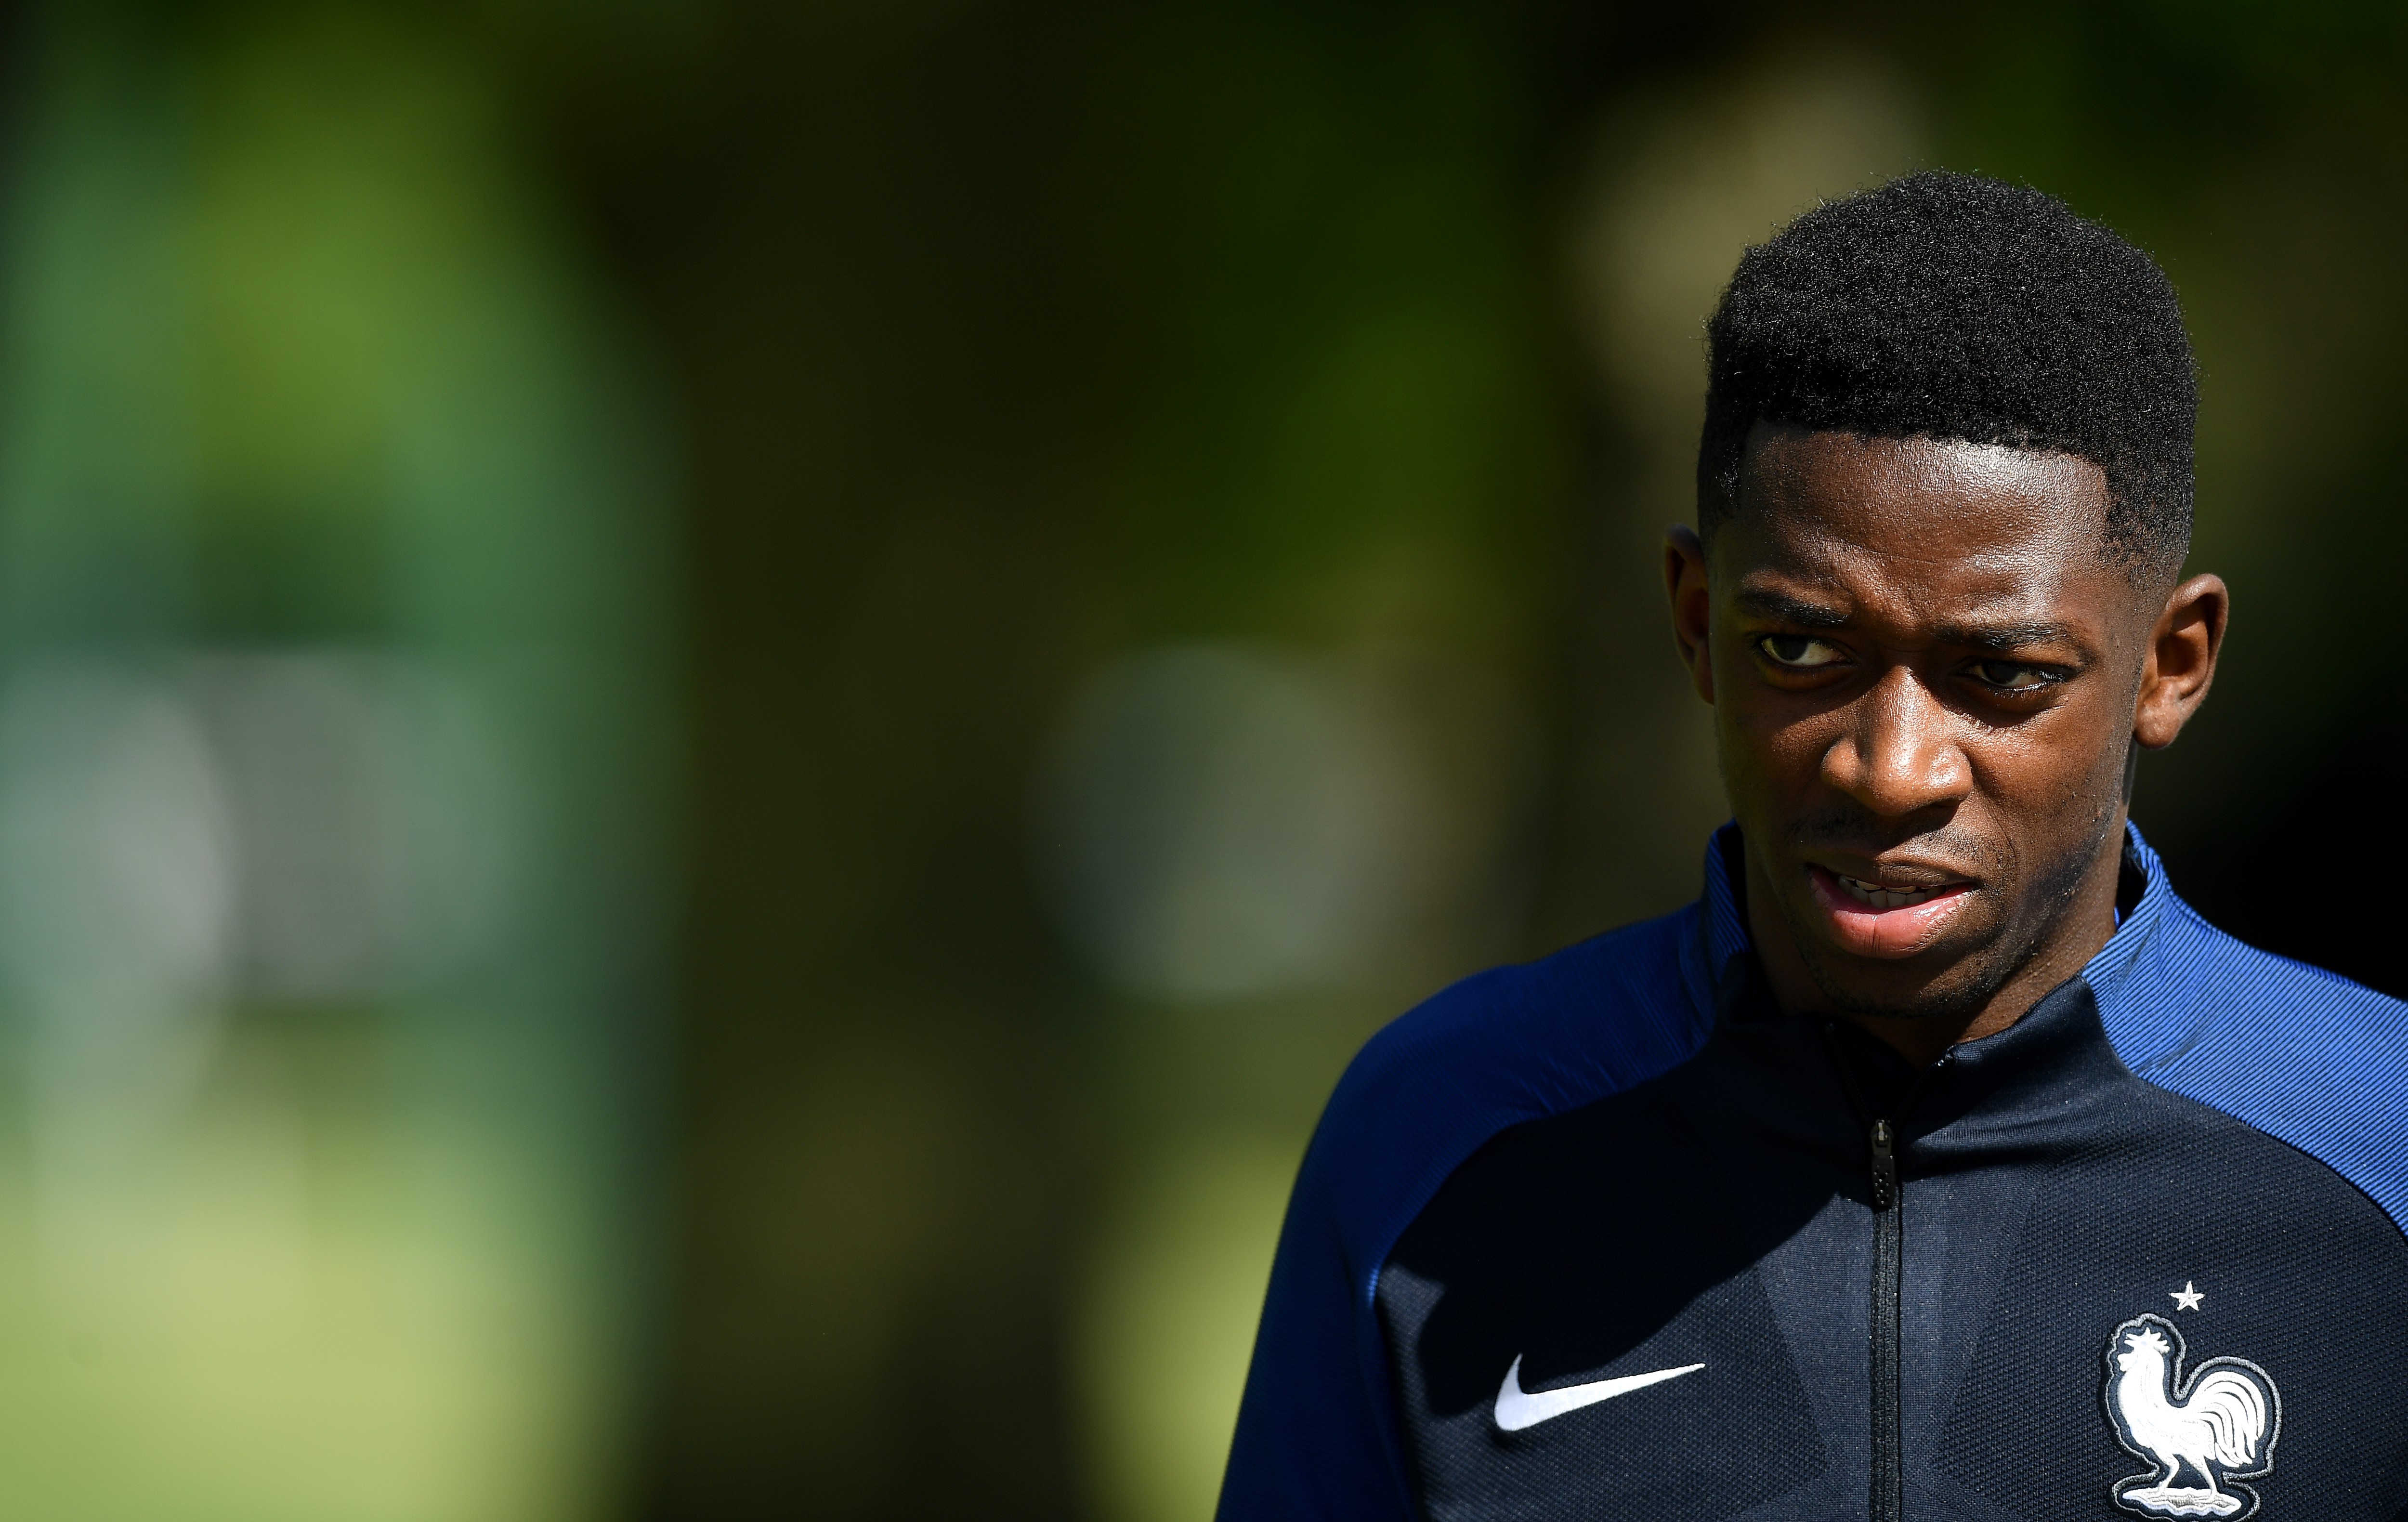 France's forward Ousmane Dembele arrives for a training session in Clairefontaine en Yvelines on June 6, 2017 as part of the team's preparation for the upcoming WC 2018 qualifiers against Sweden.  / AFP PHOTO / FRANCK FIFE        (Photo credit should read FRANCK FIFE/AFP/Getty Images)